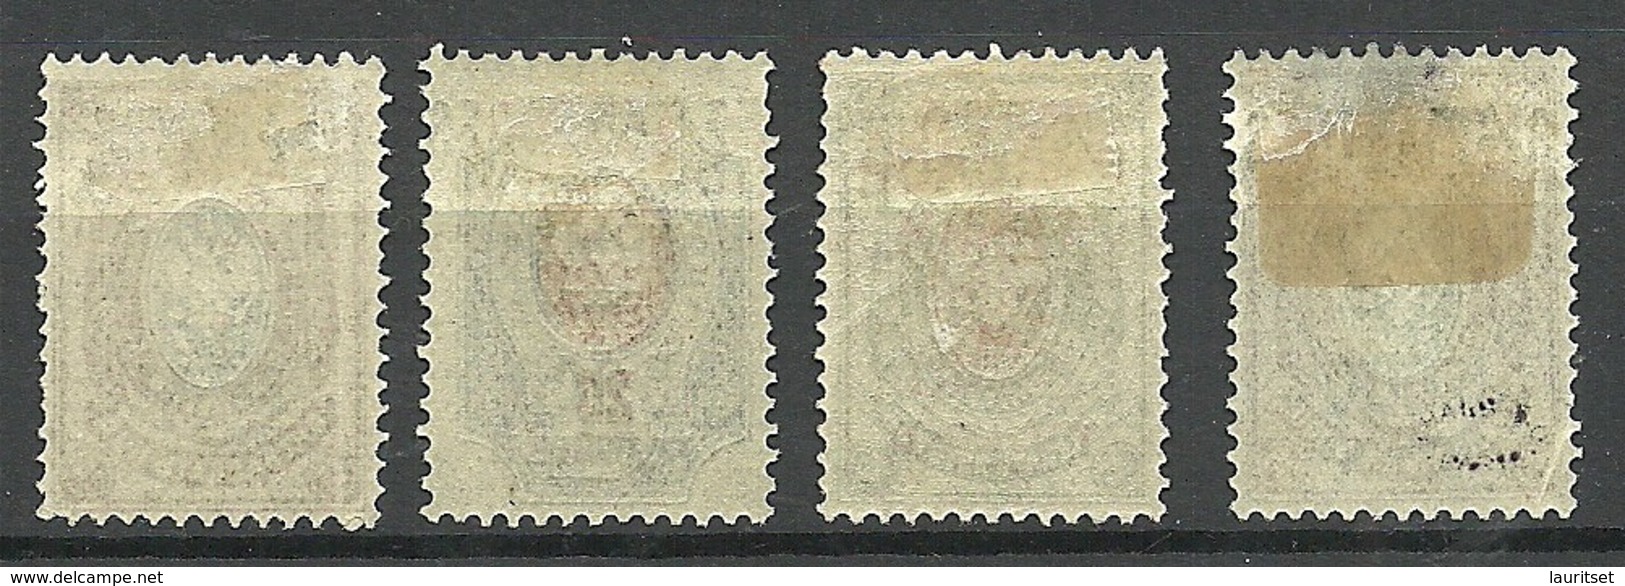 RUSSLAND 1920 Civil War Wrangel Army Camp Post At Gallipoli On Levante Levant OPT Stamps * - Wrangel Army